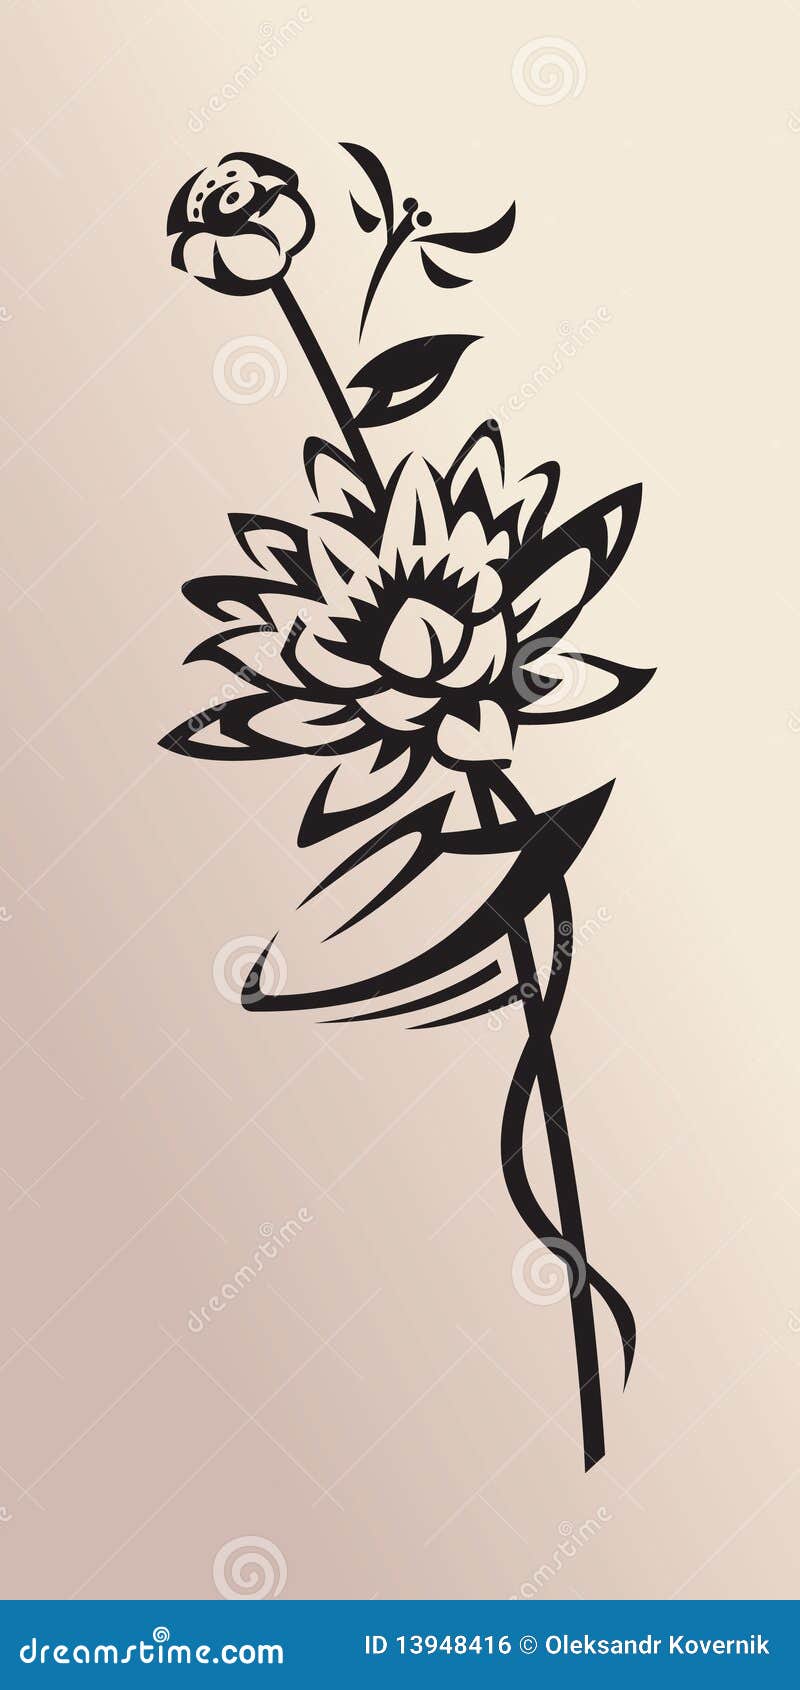 102 Attractive Water Lily Tattoo Ideas With Meaning!